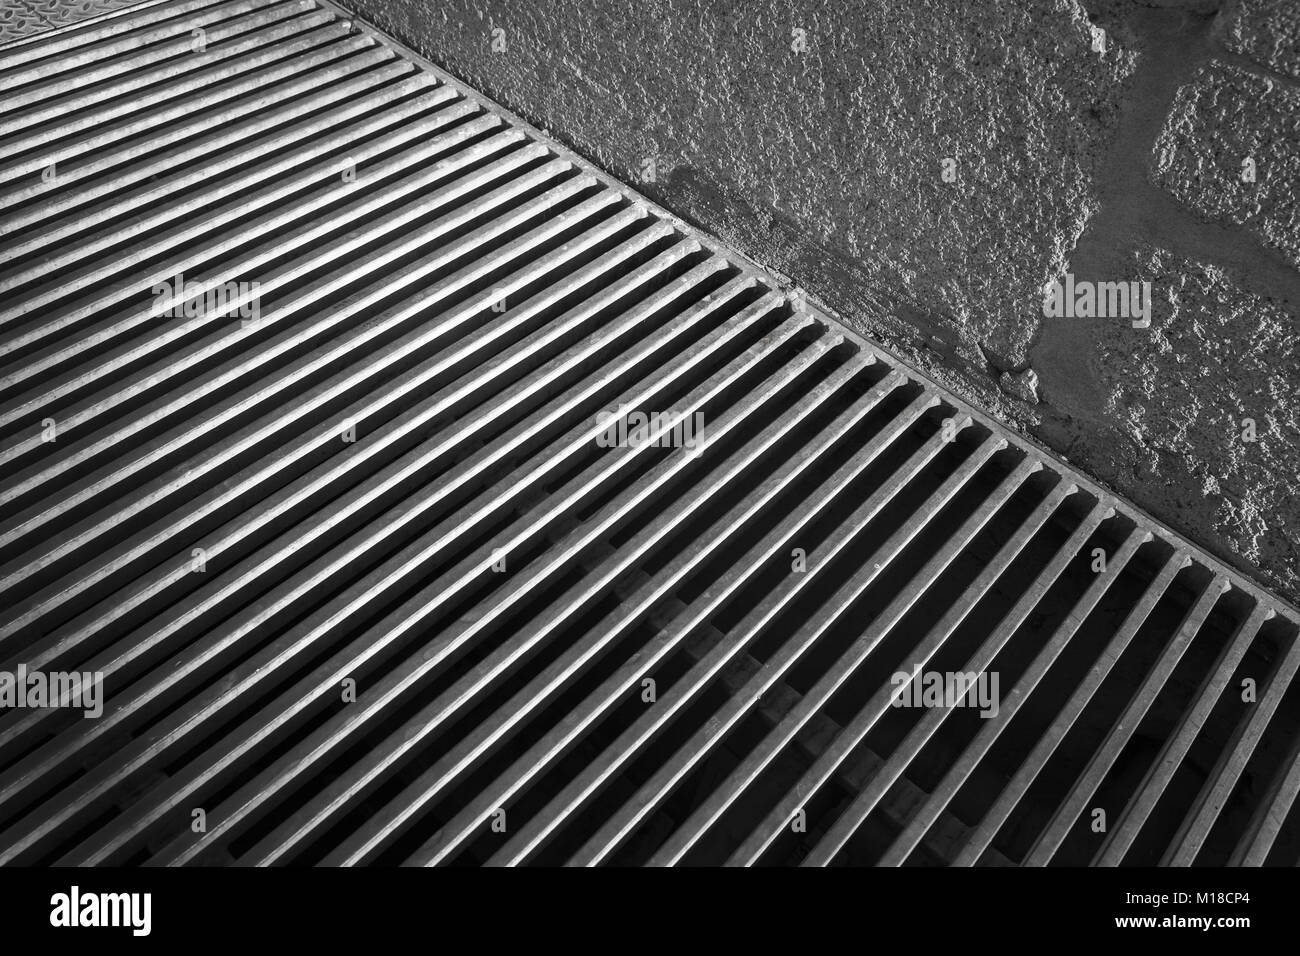 Steel grating of urban drainage system near concrete wall, abstract background photo Stock Photo